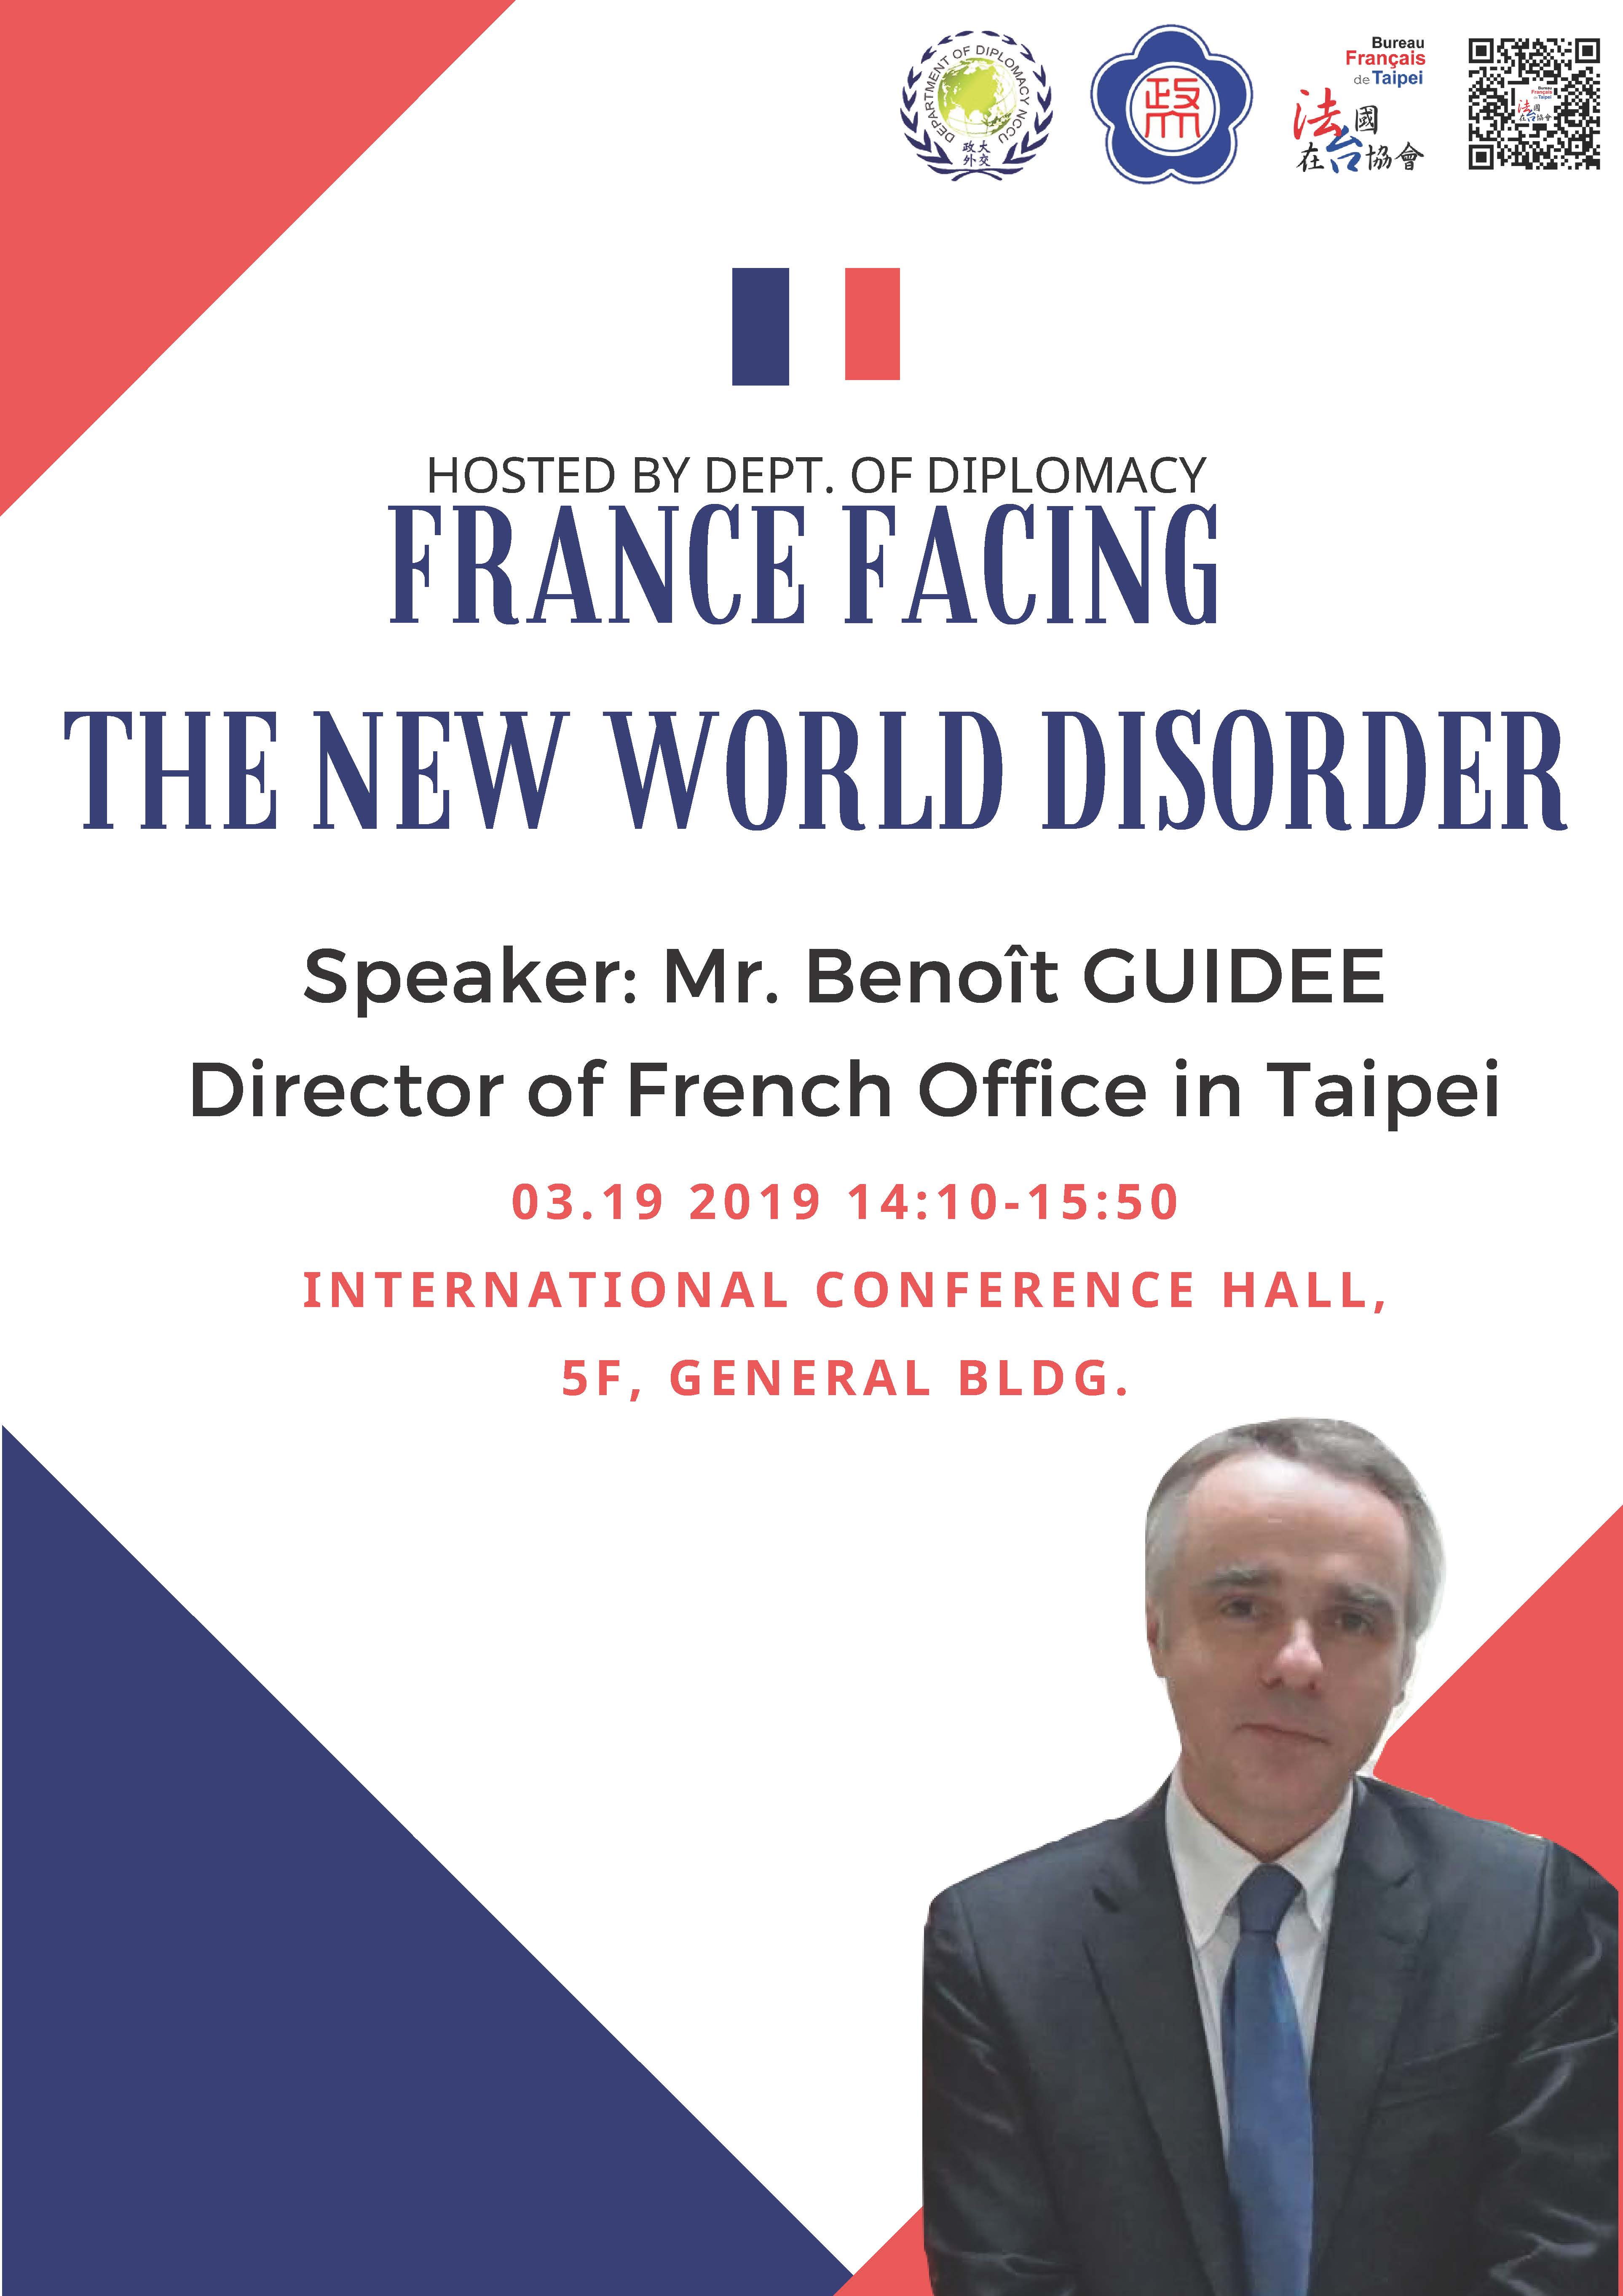 FRANCE FACING THE NEW WORLD DISORDER Speaker: Mr. Benoît GUIDEE Director of French Office in Taipei